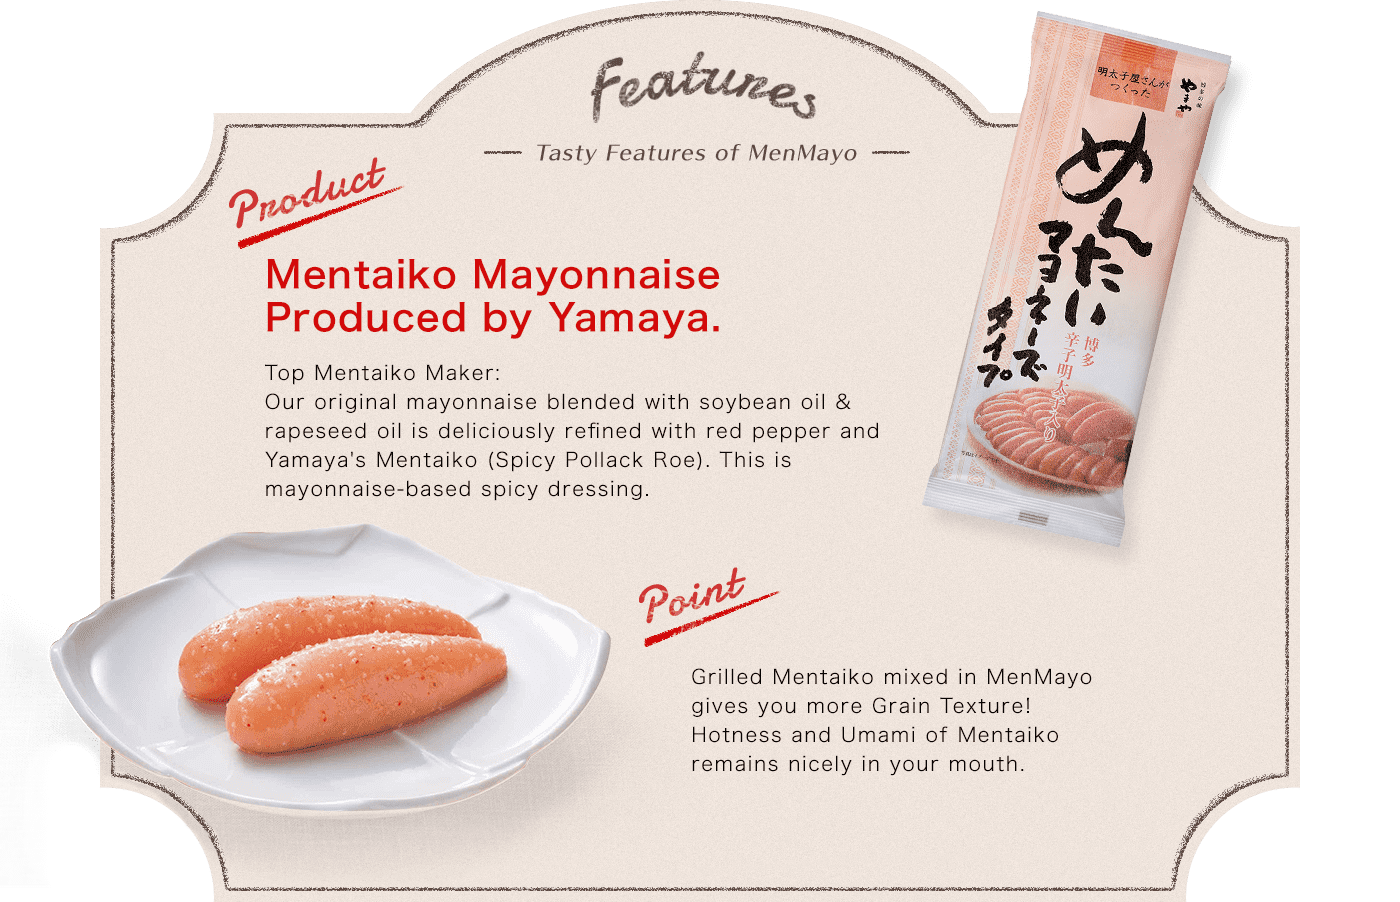 Features -Tasty Features of MenMayo- Product:Mentaiko Mayonnaise Produced by Yamaya. Top Mentaiko Maker:Our original mayonnaise blended with soybean oil & rapeseed oil is deliciously refined with red pepper and Yamaya's Mentaiko (Spicy Pollack Roe). This is mayonnaise-based spicy dressing. point:Grilled Mentaiko mixed in MenMayo gives you more Grain Texture!Hotness and Umami of Mentaiko remains nicely in your mouth. Refreshing Citrus Flavor Slight nice flavor of Yuzu (Citrus Fruits produced in Kyushu) gives something fresh in the taste of MenMayo.